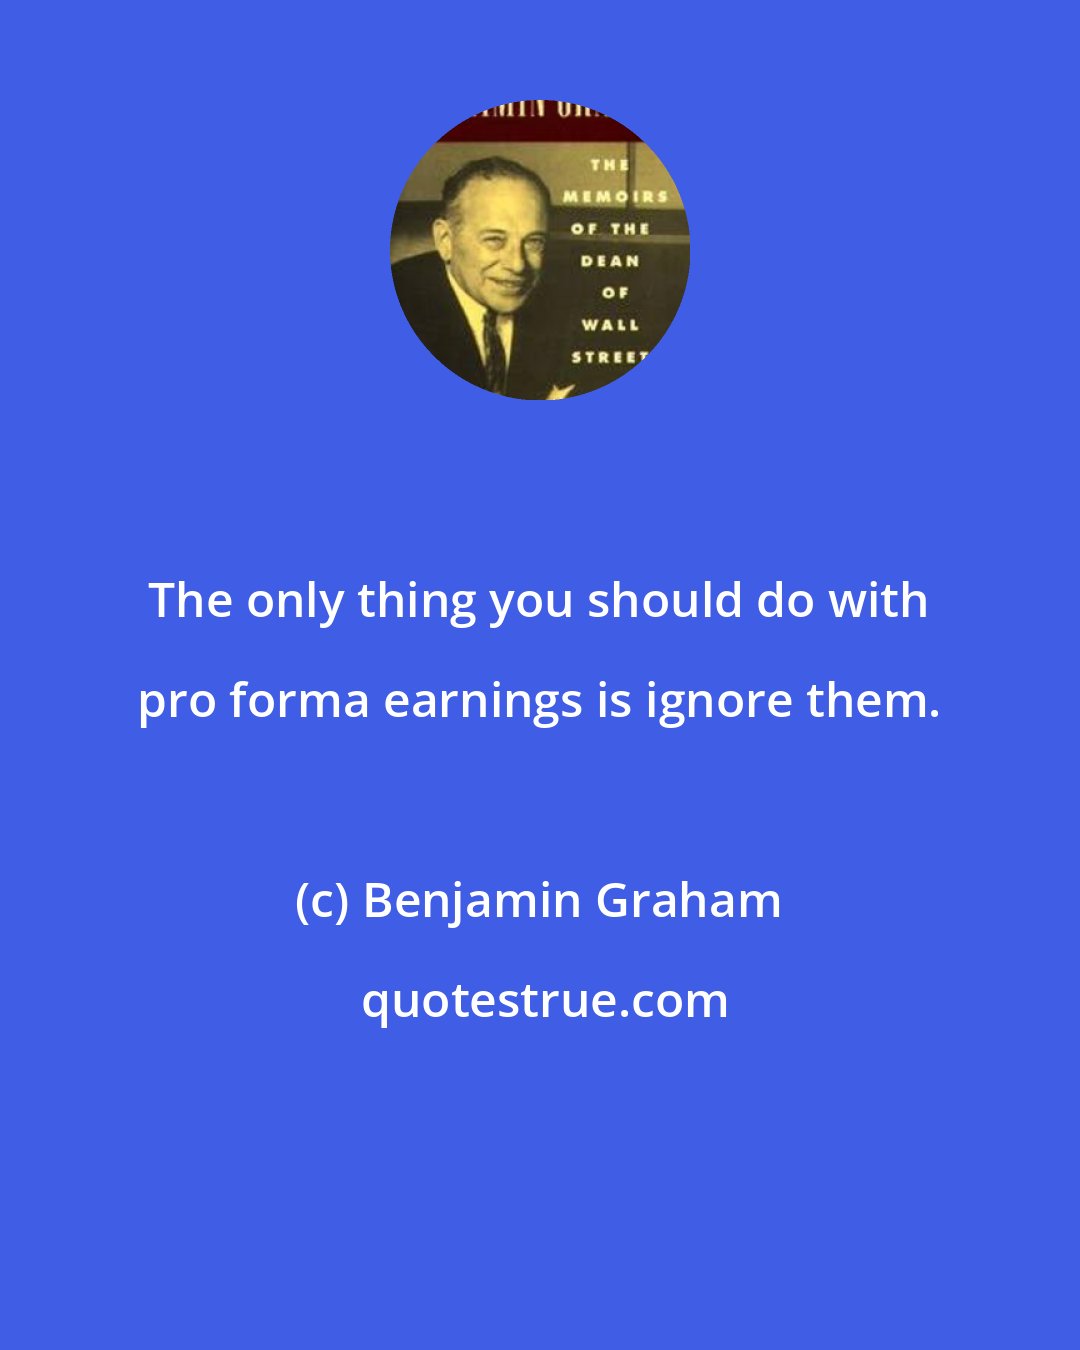 Benjamin Graham: The only thing you should do with pro forma earnings is ignore them.